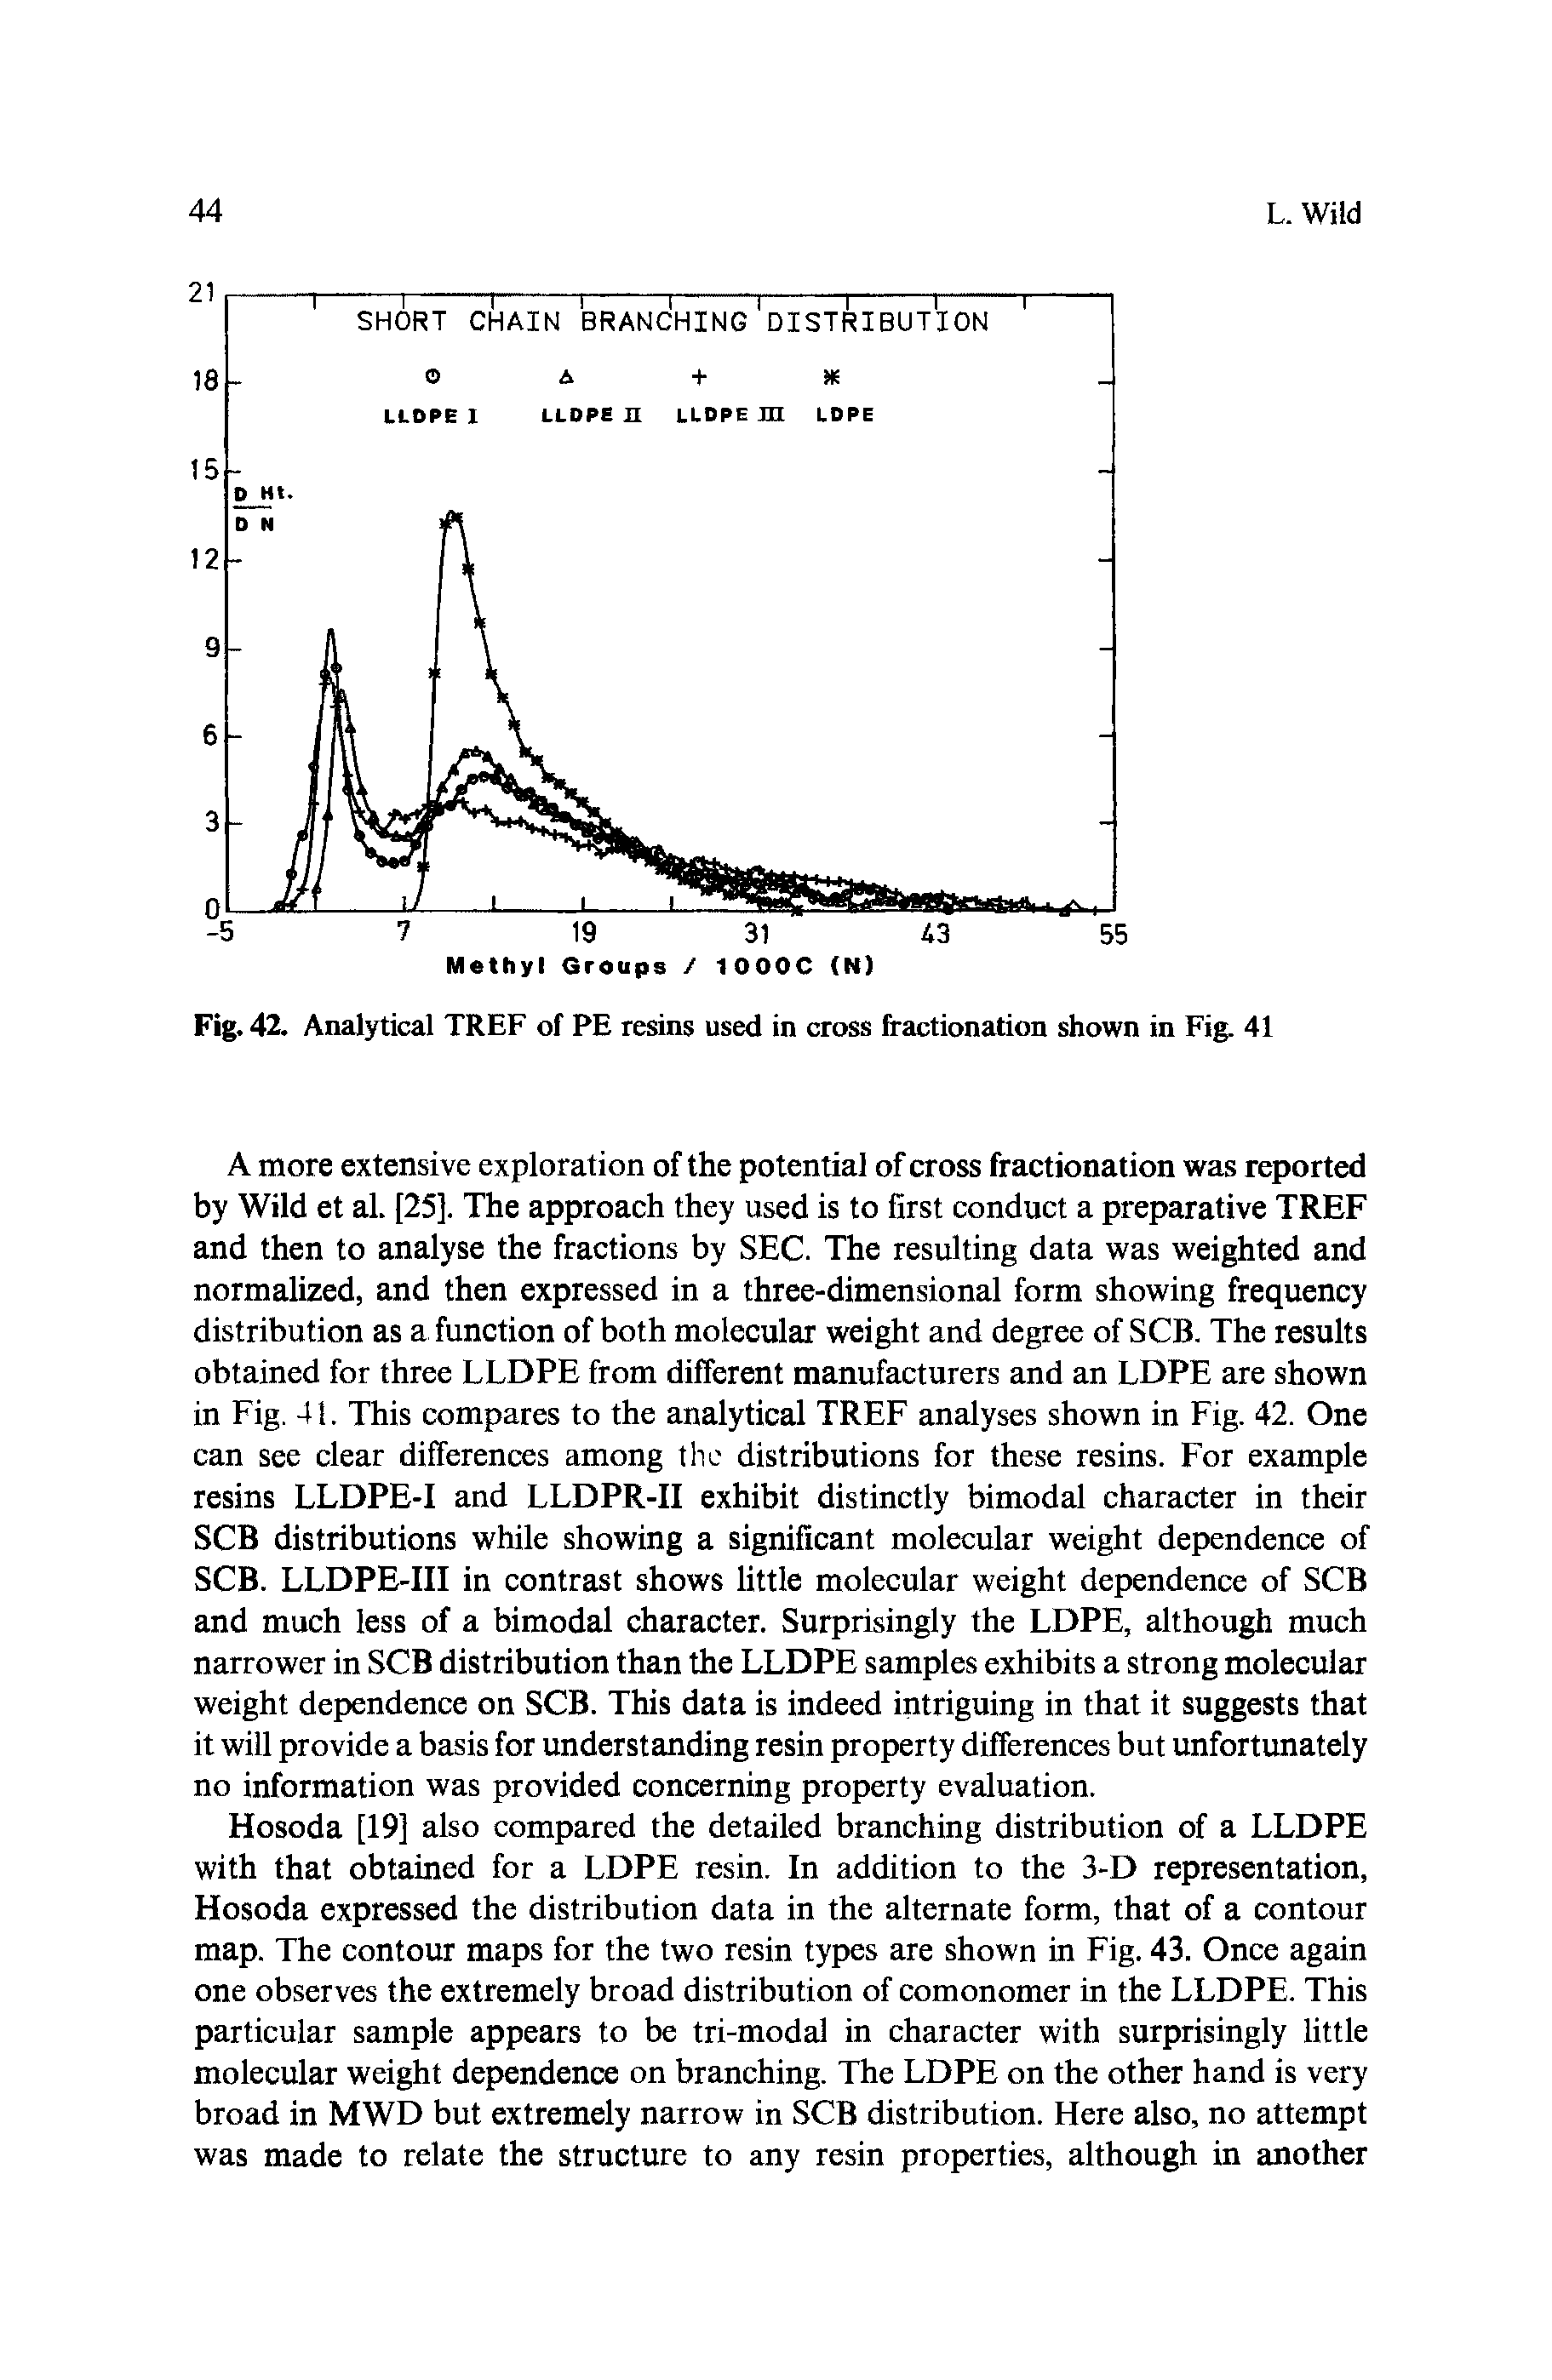 Fig. 42. Analytical TREF of PE resins used in cross fractionation shown in Fig. 41...